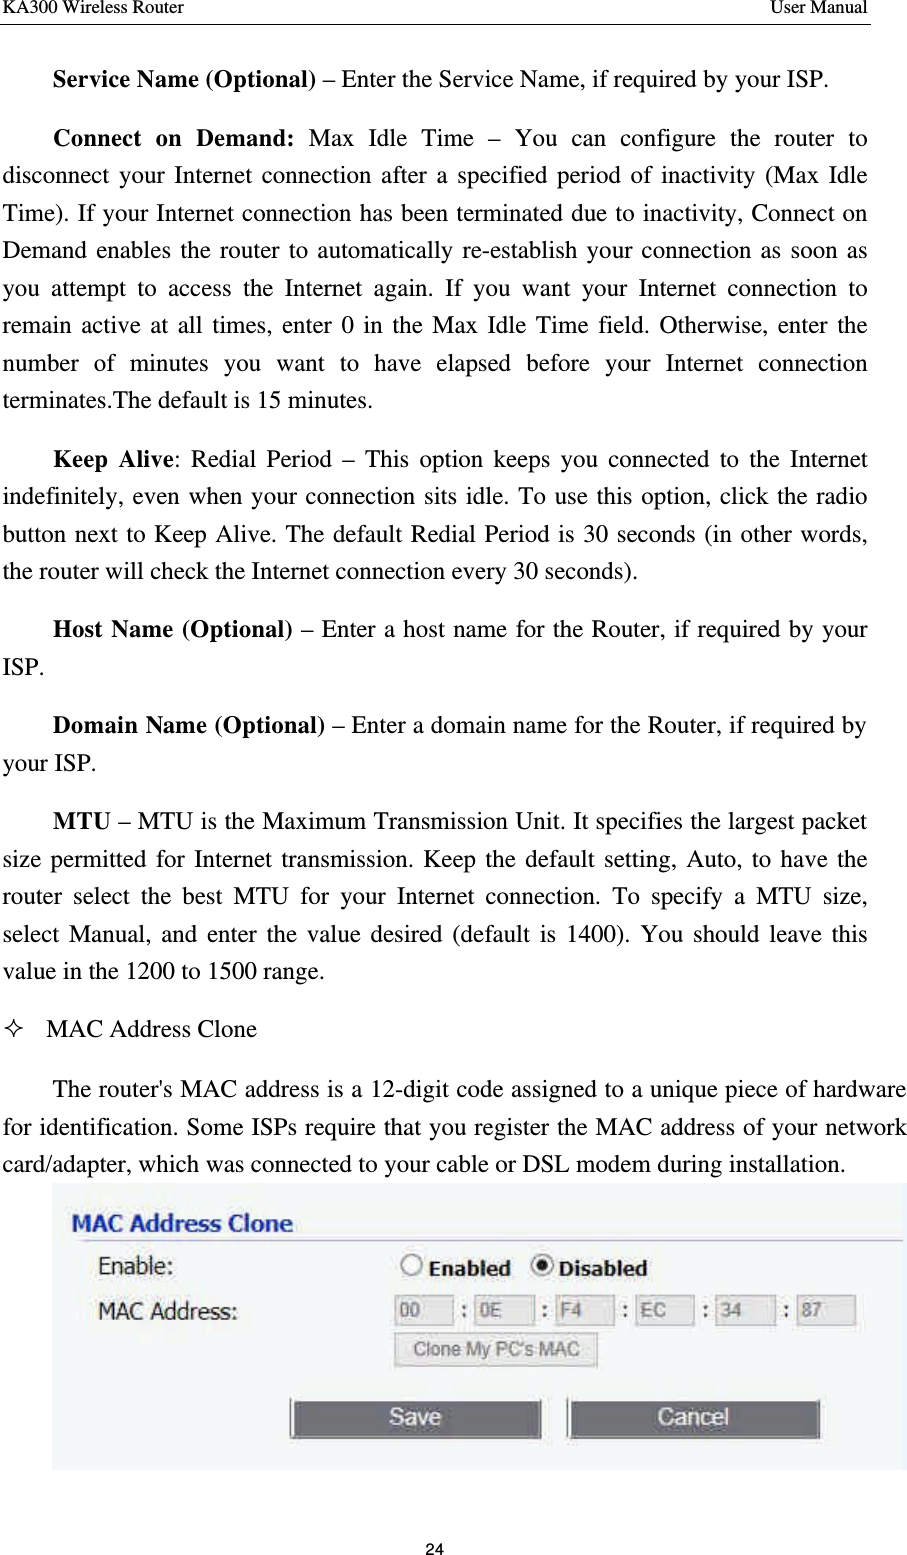 KA300 Wireless Router       User Manual 24  Service Name (Optional) – Enter the Service Name, if required by your ISP.   Connect on Demand: Max Idle Time – You can configure the router to disconnect your Internet connection after a specified period of inactivity (Max Idle Time). If your Internet connection has been terminated due to inactivity, Connect on Demand enables the router to automatically re-establish your connection as soon as you attempt to access the Internet again. If you want your Internet connection to remain active at all times, enter 0 in the Max Idle Time field. Otherwise, enter the number of minutes you want to have elapsed before your Internet connection terminates.The default is 15 minutes. Keep Alive: Redial Period – This option keeps you connected to the Internet indefinitely, even when your connection sits idle. To use this option, click the radio button next to Keep Alive. The default Redial Period is 30 seconds (in other words, the router will check the Internet connection every 30 seconds). Host Name (Optional) – Enter a host name for the Router, if required by your ISP. Domain Name (Optional) – Enter a domain name for the Router, if required by your ISP. MTU – MTU is the Maximum Transmission Unit. It specifies the largest packet size permitted for Internet transmission. Keep the default setting, Auto, to have the router select the best MTU for your Internet connection. To specify a MTU size, select Manual, and enter the value desired (default is 1400). You should leave this value in the 1200 to 1500 range. ² MAC Address Clone The router&apos;s MAC address is a 12-digit code assigned to a unique piece of hardware for identification. Some ISPs require that you register the MAC address of your network card/adapter, which was connected to your cable or DSL modem during installation.  